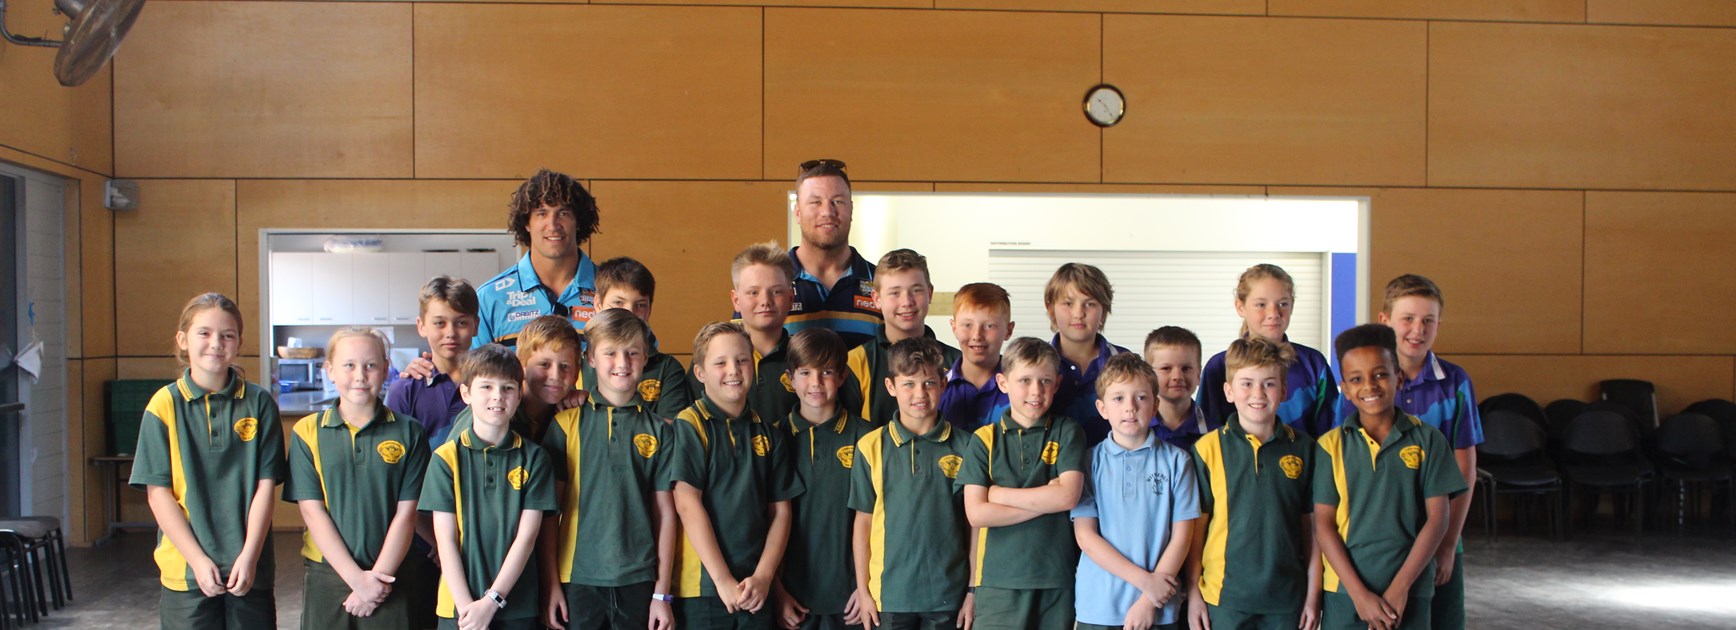 Titans visit lifts Canungra students before big game